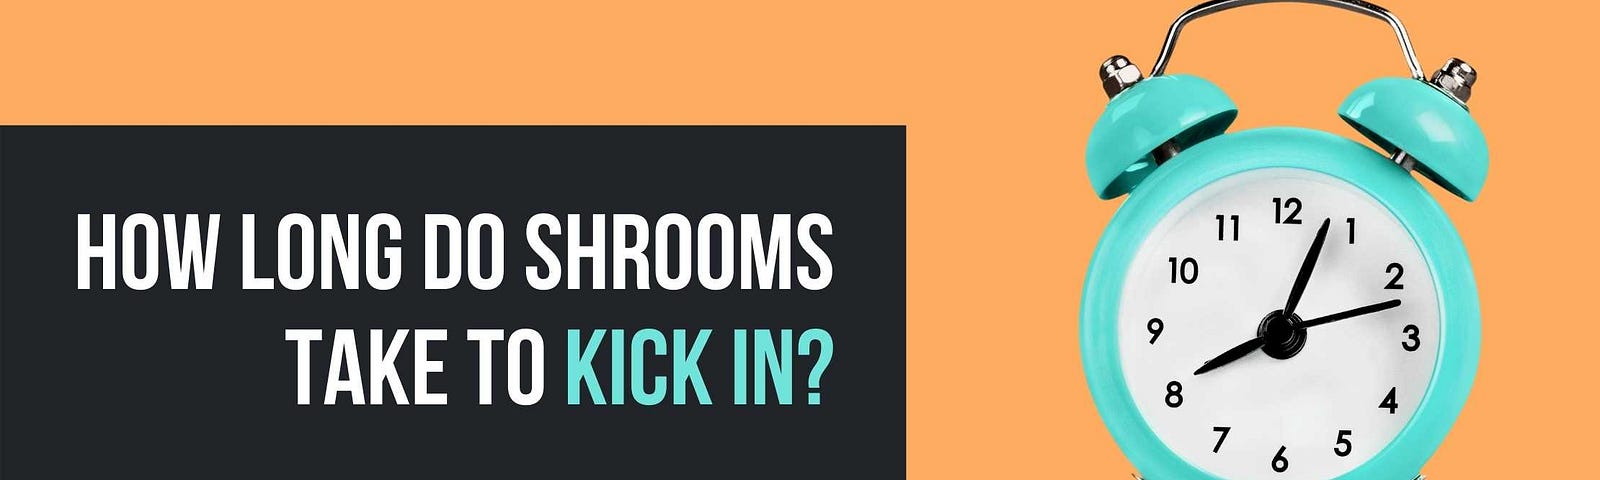 How long do shrooms take to kick in? With a big blue clock